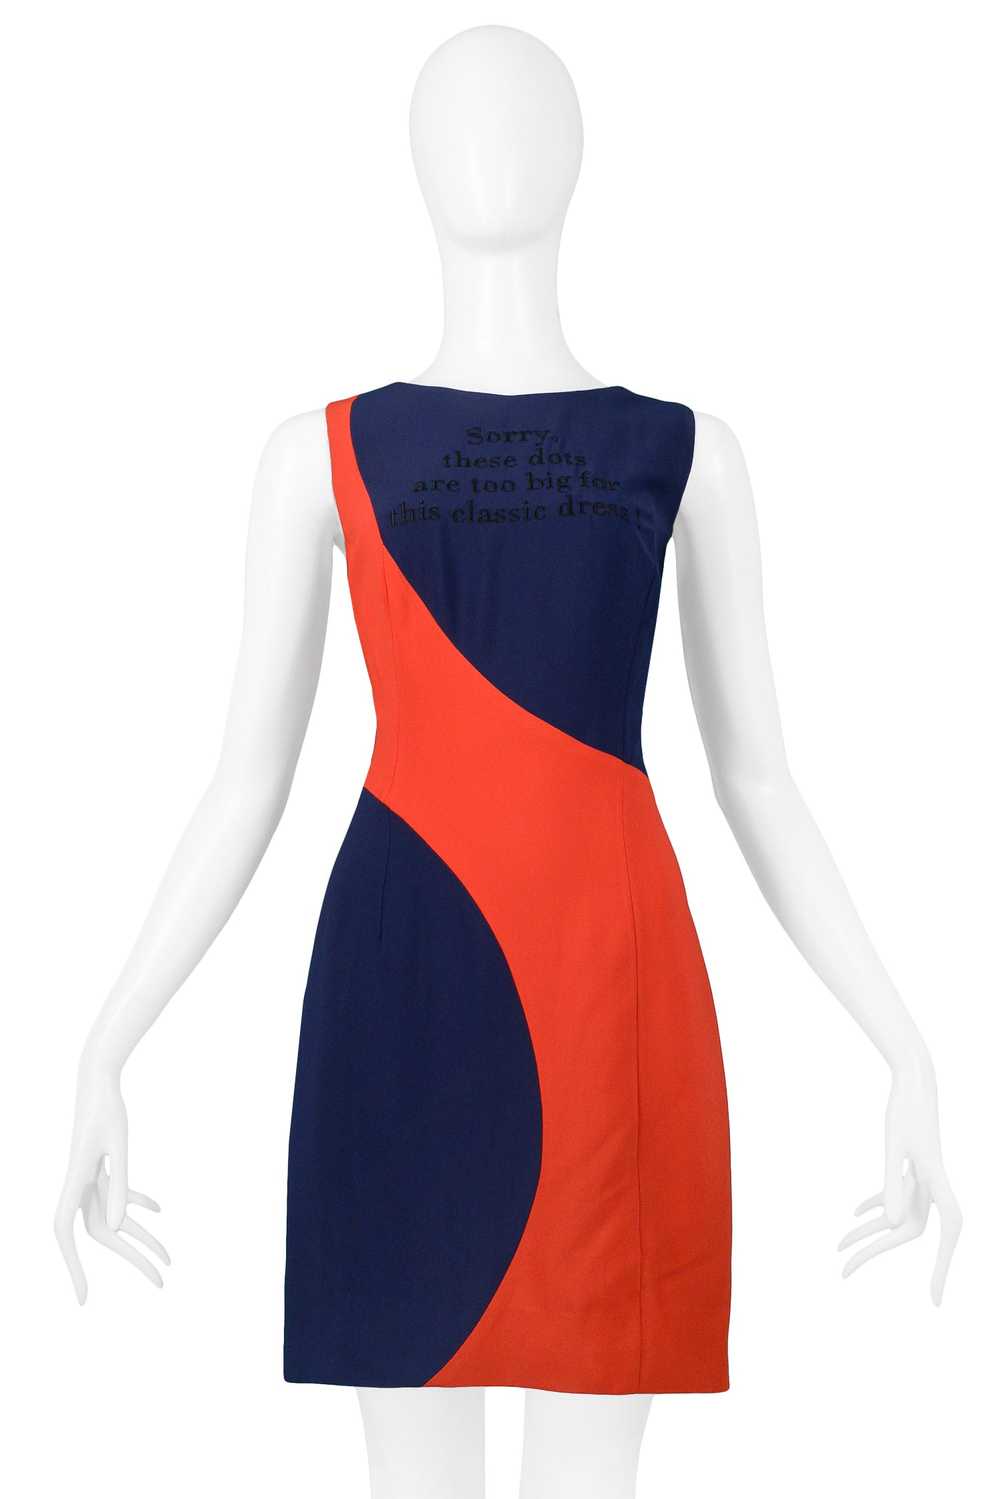 MOSCHINO COUTURE NAVY & RED BIG DOT DRESS - image 2